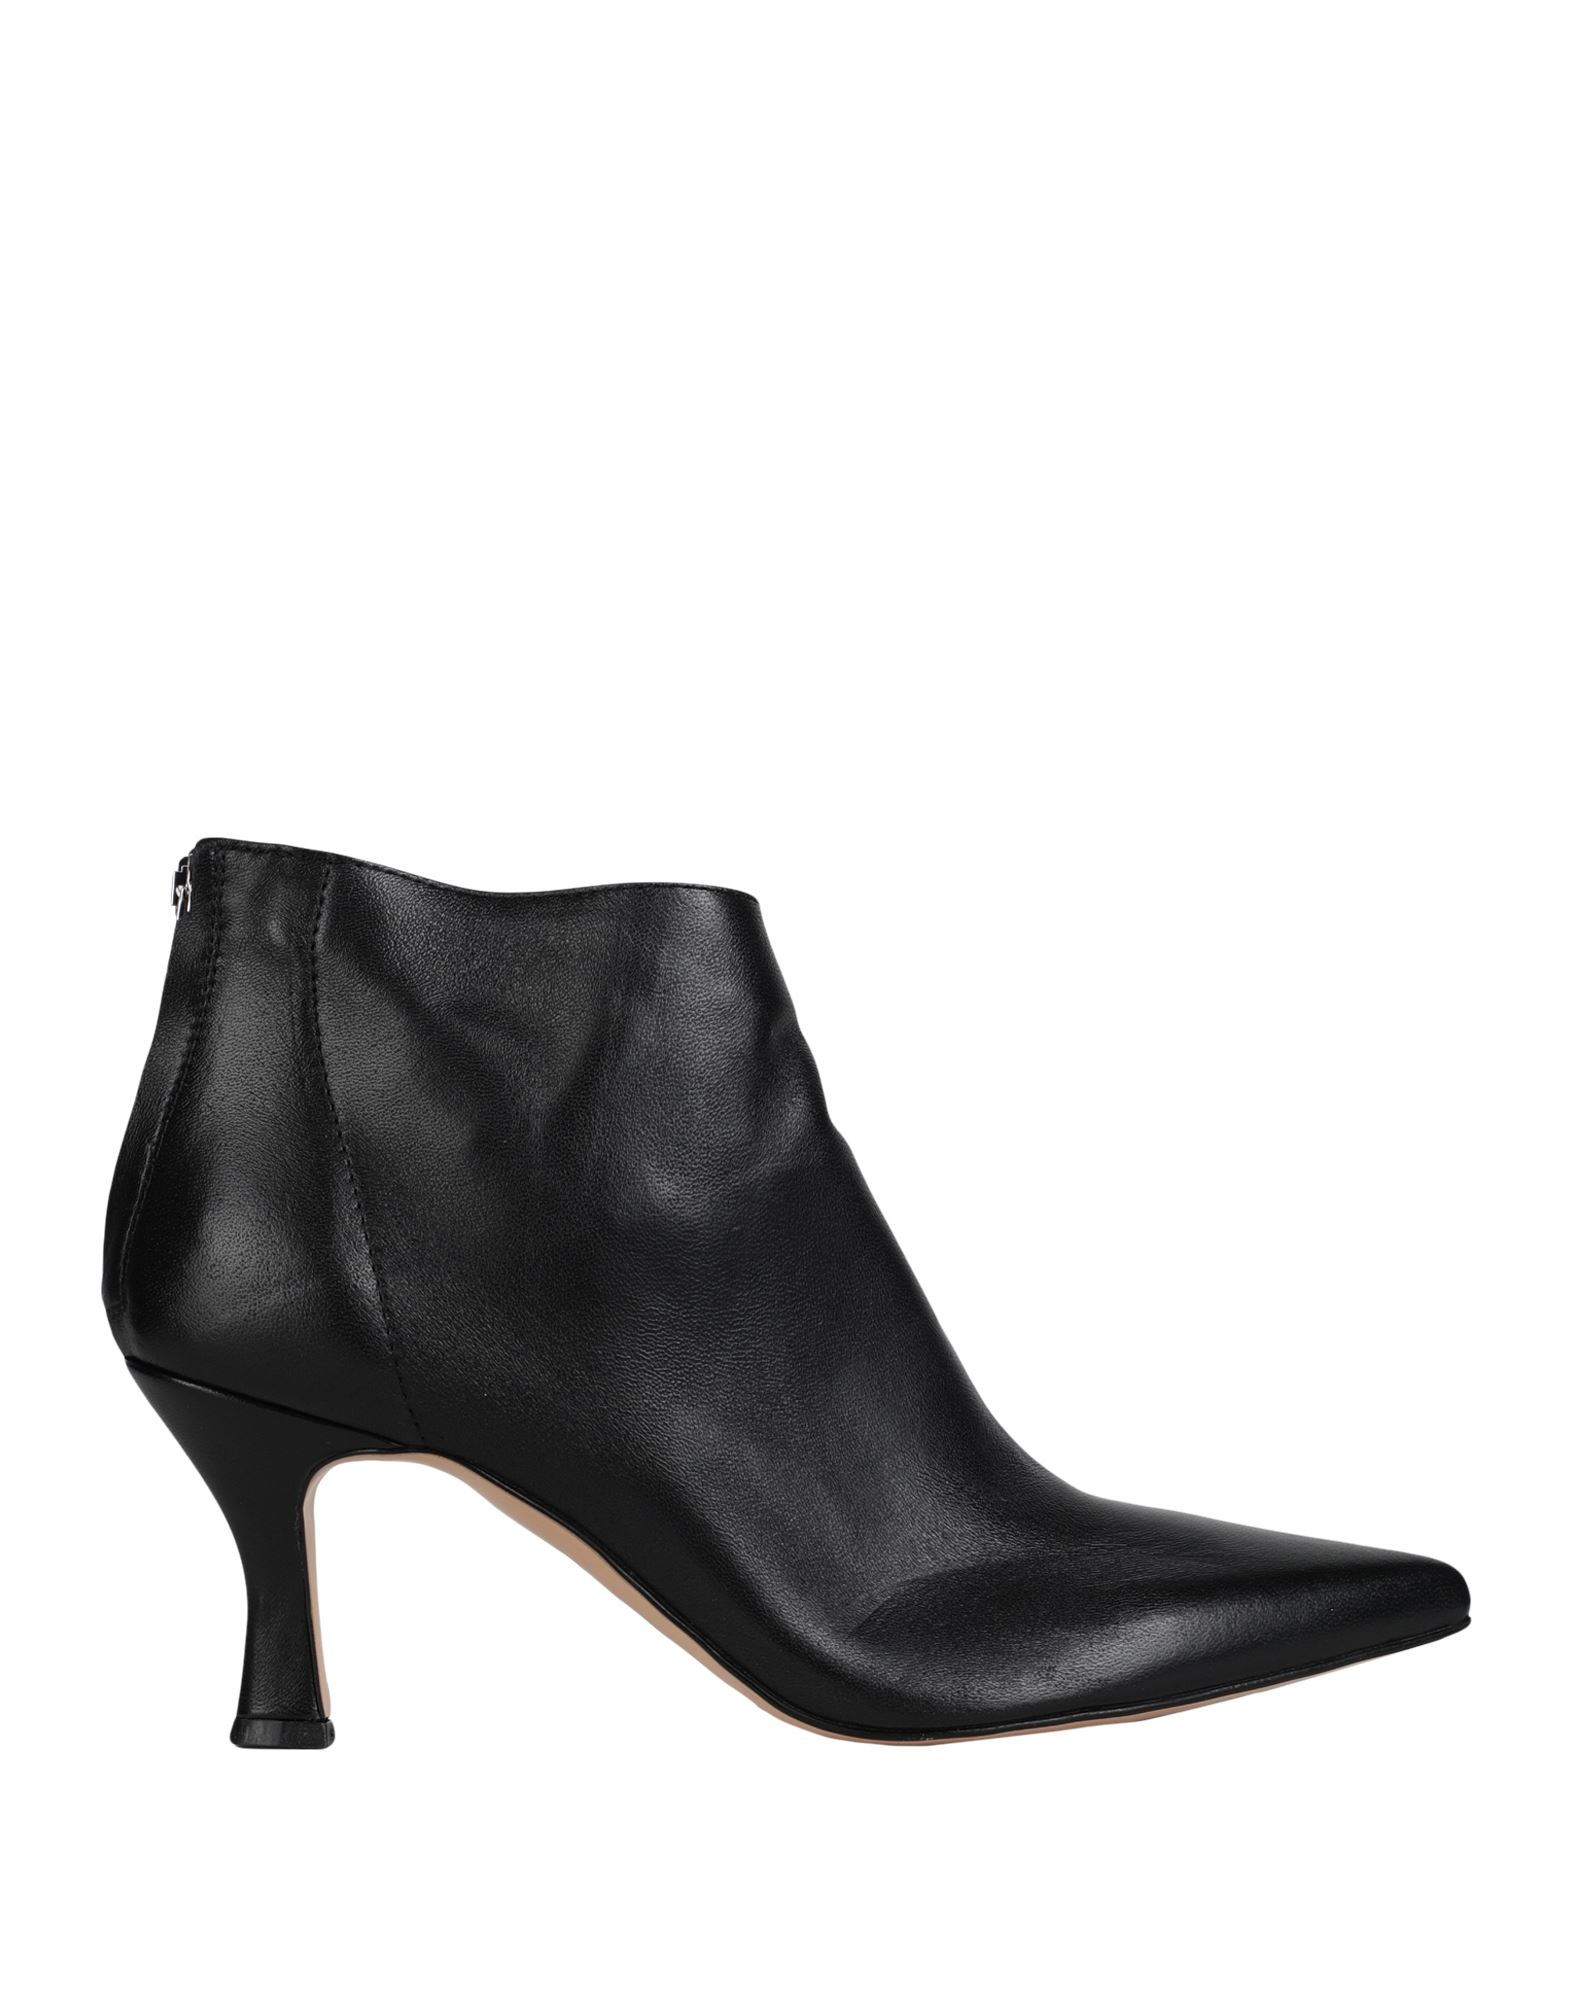 Ovye' By Cristina Lucchi Woman Ankle Boots Black Size 7 Calfskin